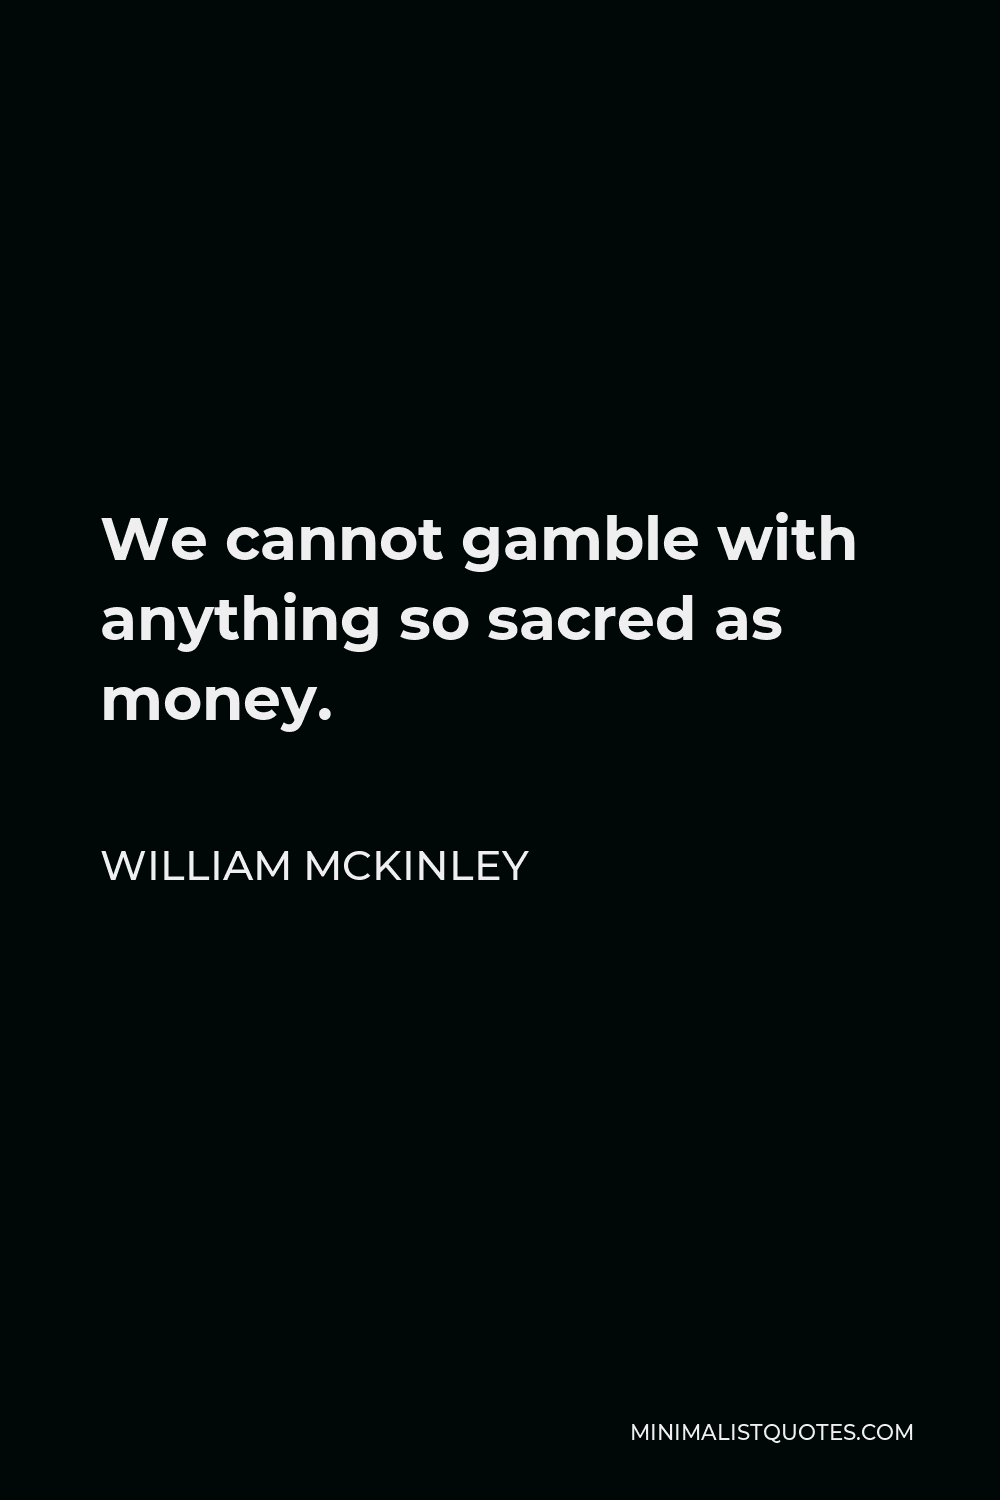 William McKinley Quote - We cannot gamble with anything so sacred as money.